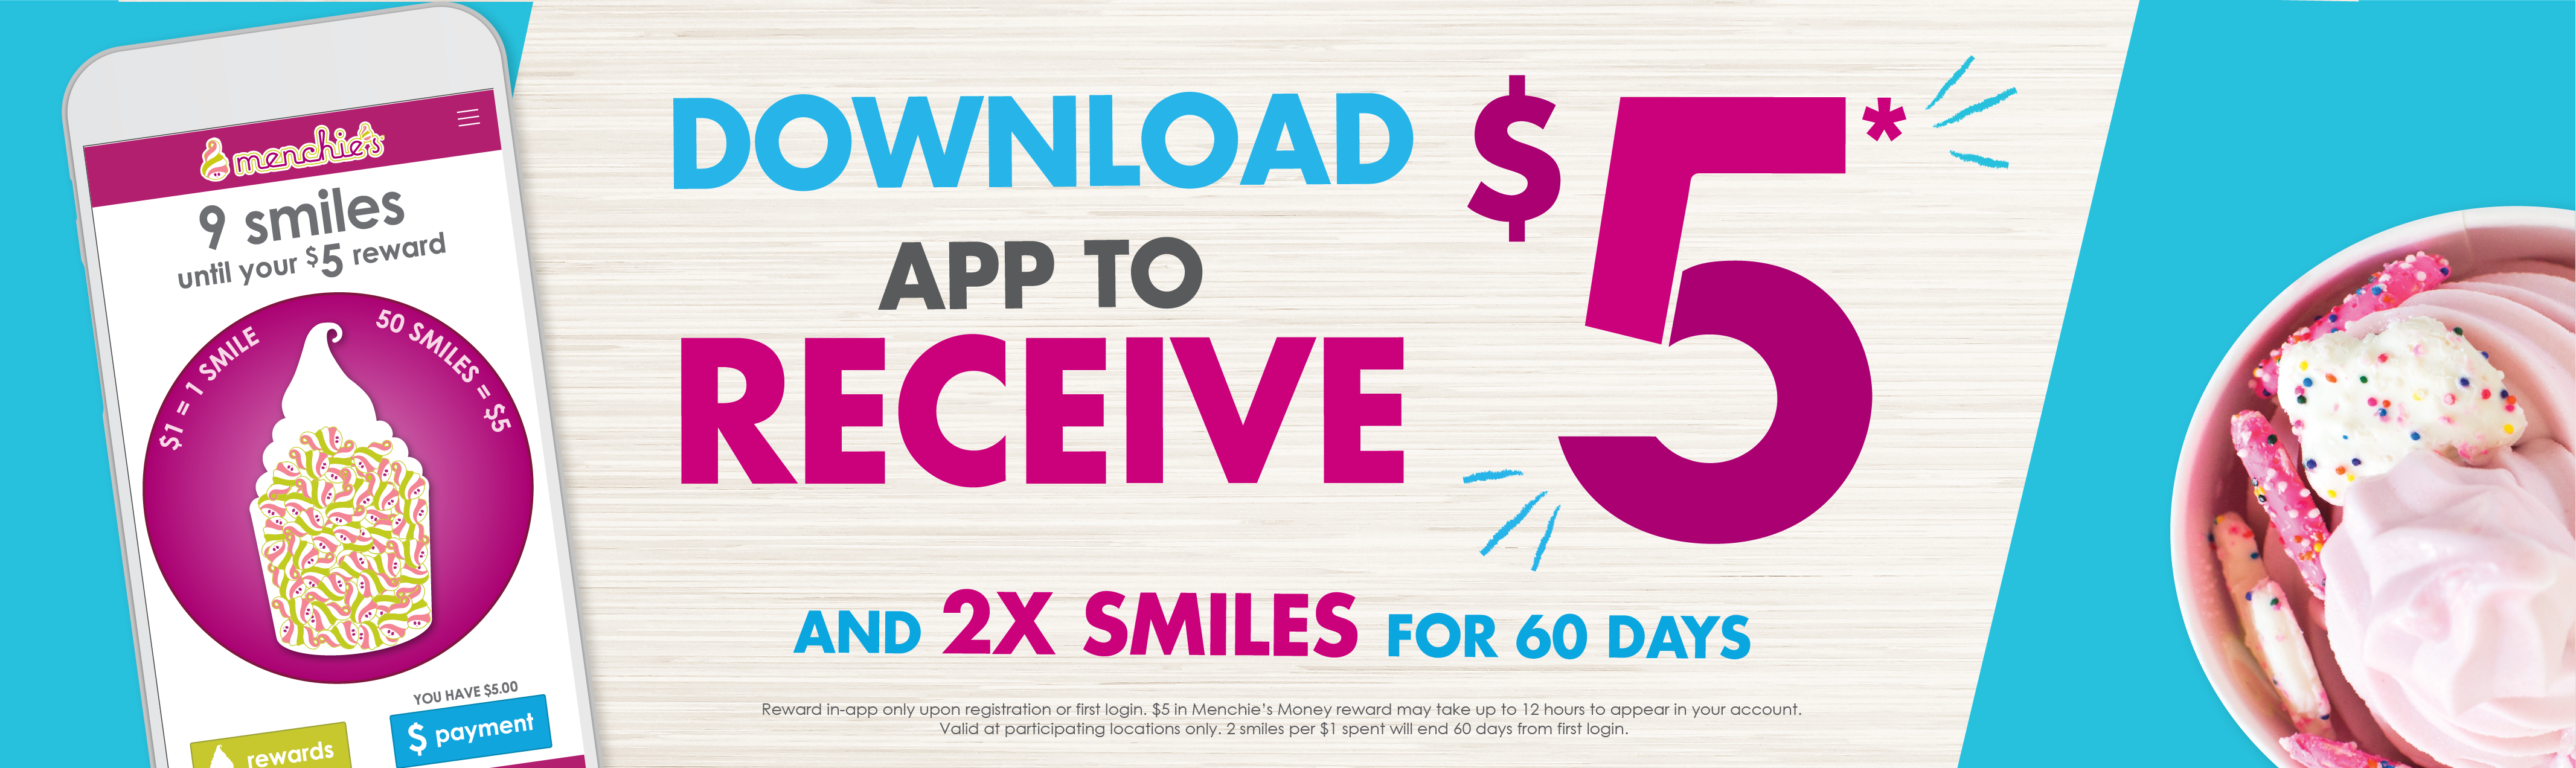 Download our app to receive $5* and 2x Smiles for 60 days